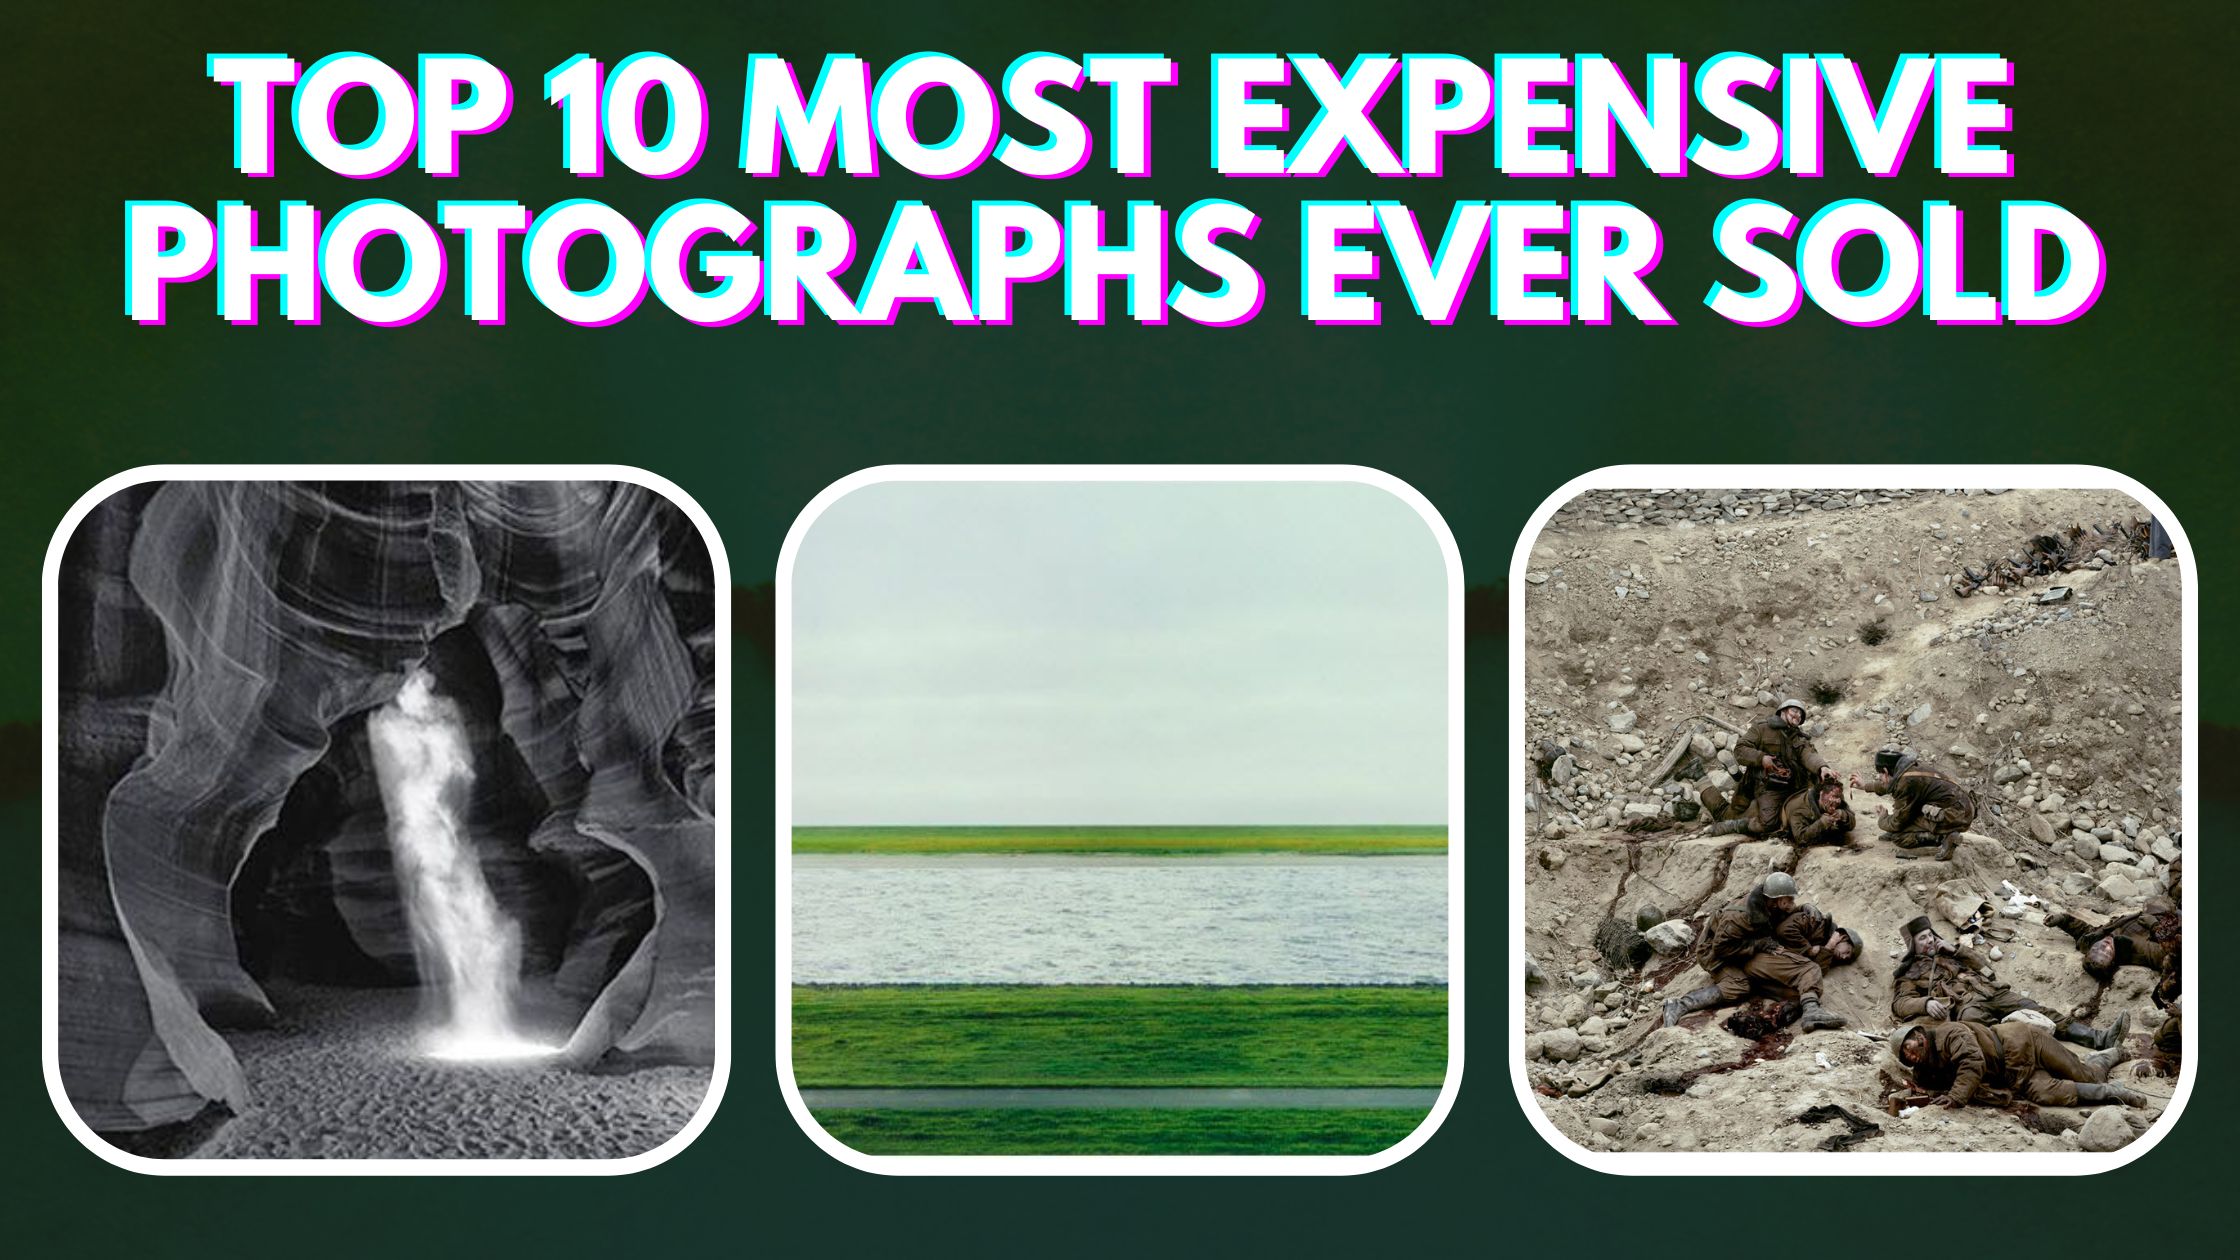 Top 10 Most Expensive Photographs Ever Sold at Auctions.